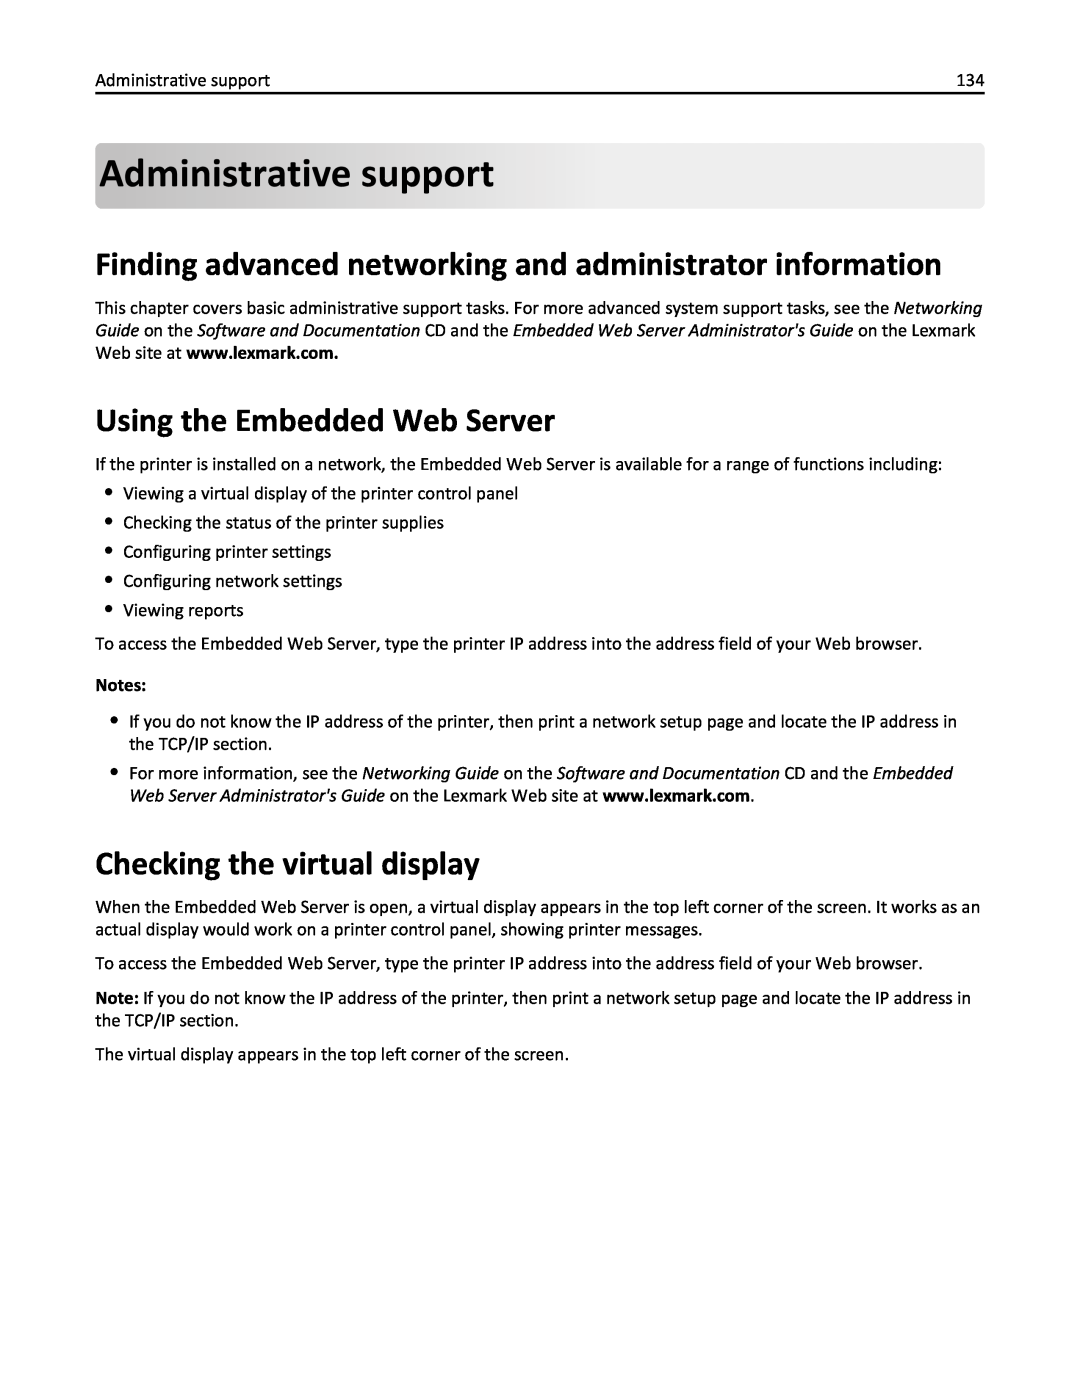 Lexmark 19Z0301, 110, W850DN manual Administrativesupport, Finding advanced networking and administrator information 